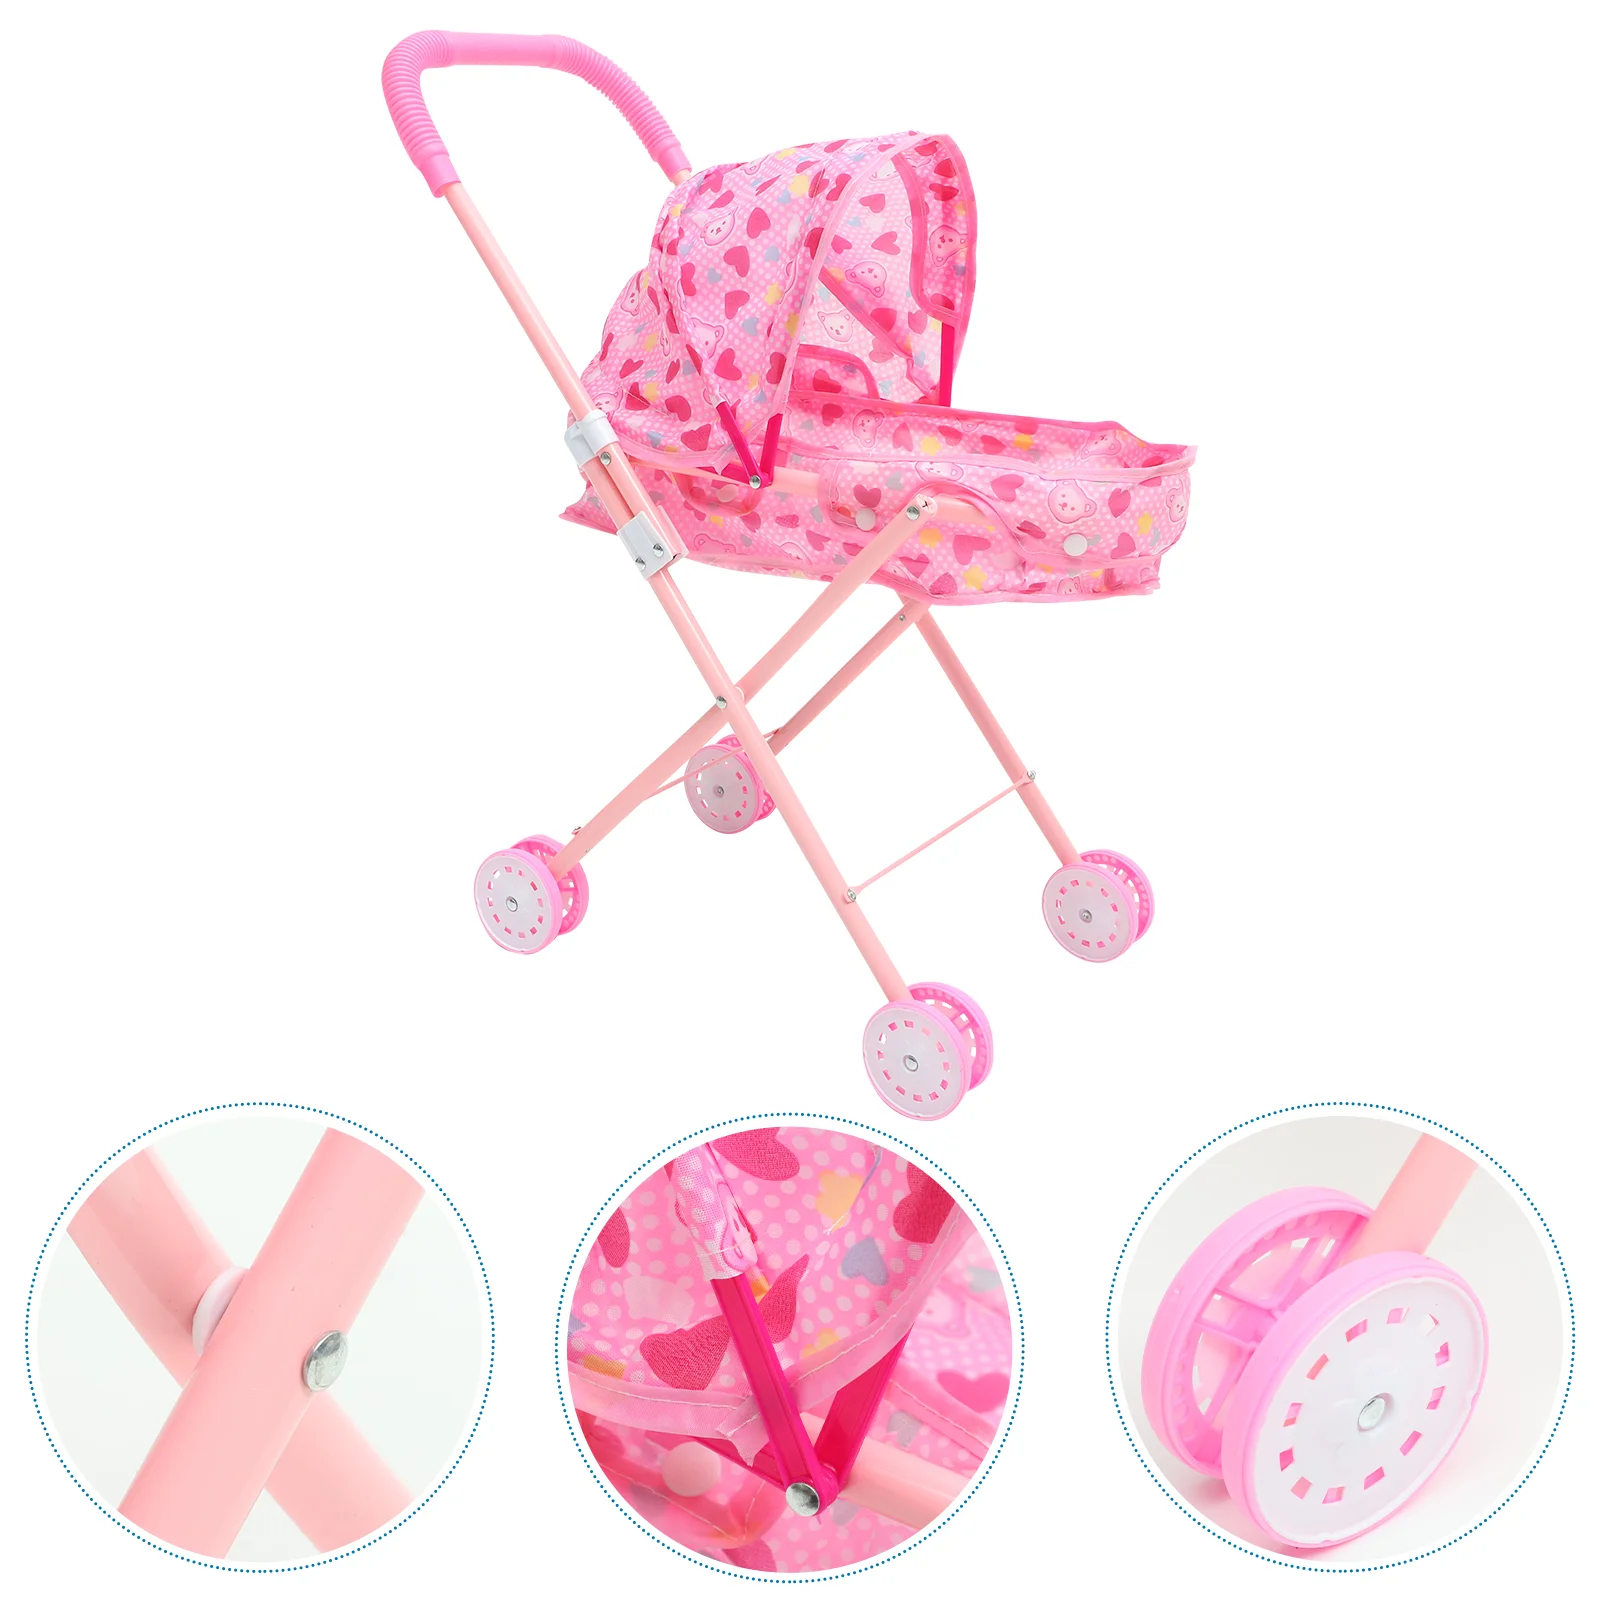 Childrens Toys Little Girl Stroller Plaything Adorable Lightweight Small Stroller twisting car mute universal wheel anti rollover childrens stroller baby girl girl swing car 1 6 years old